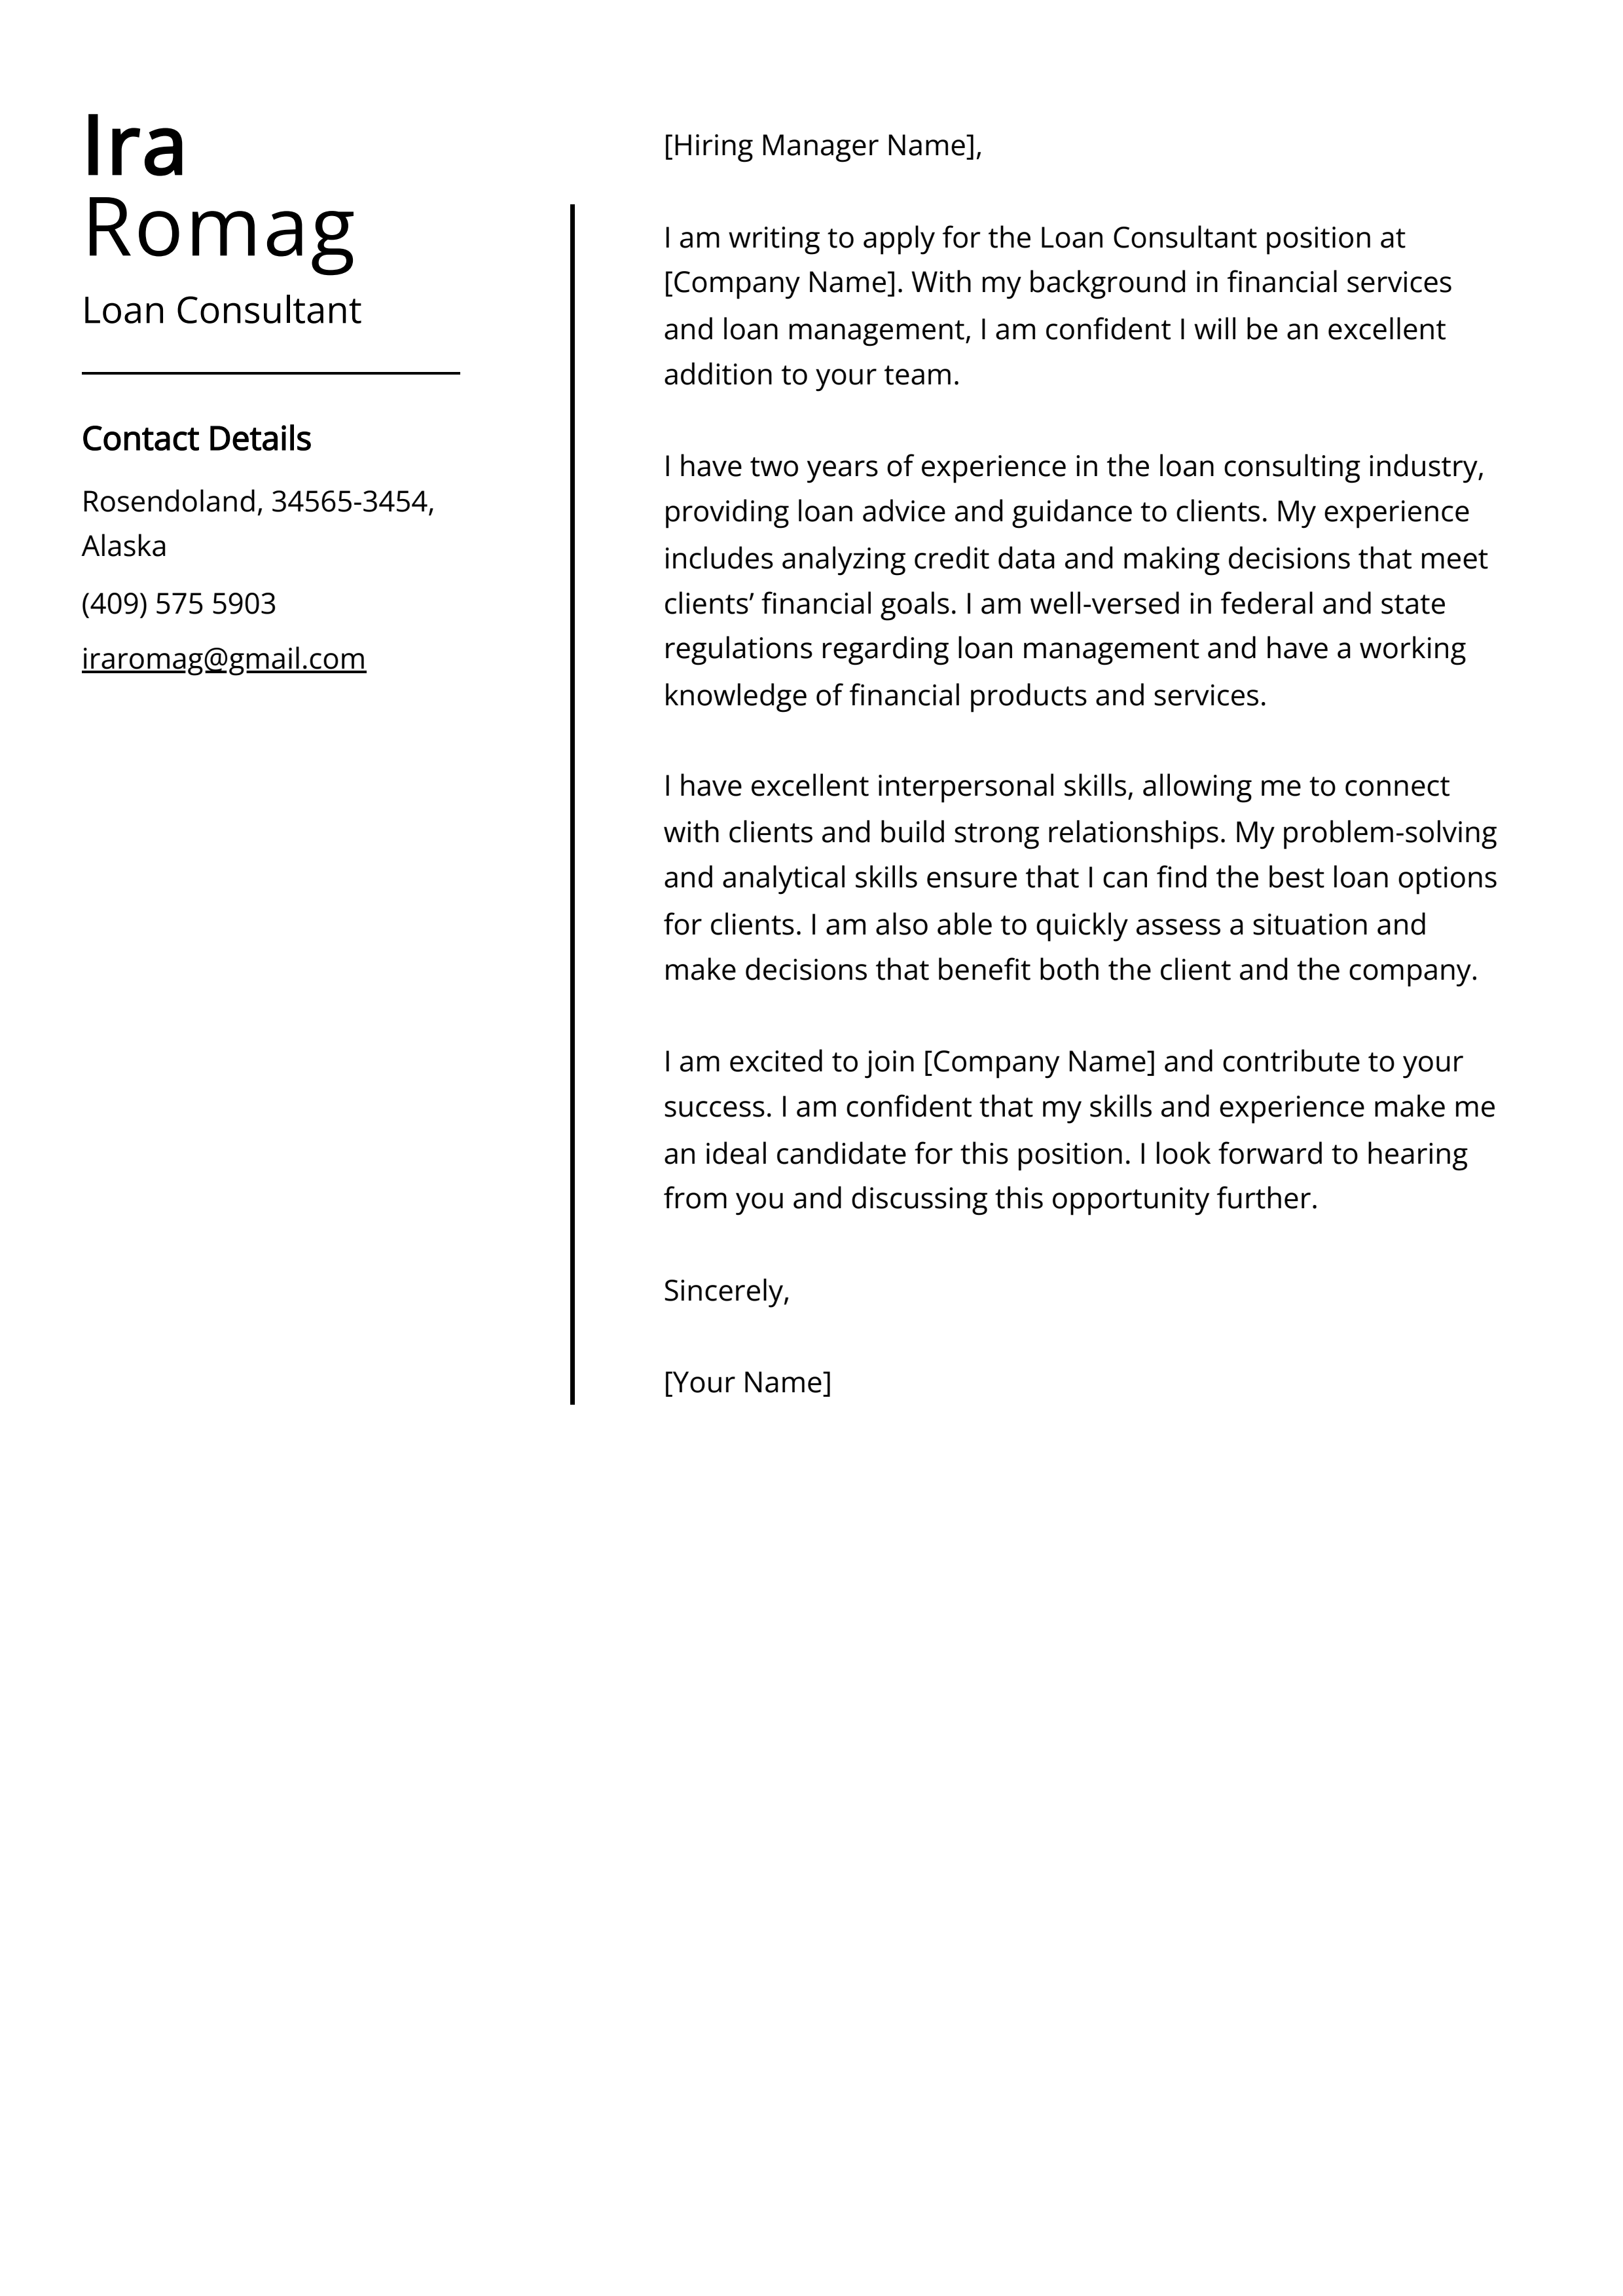 Loan Consultant Cover Letter Example